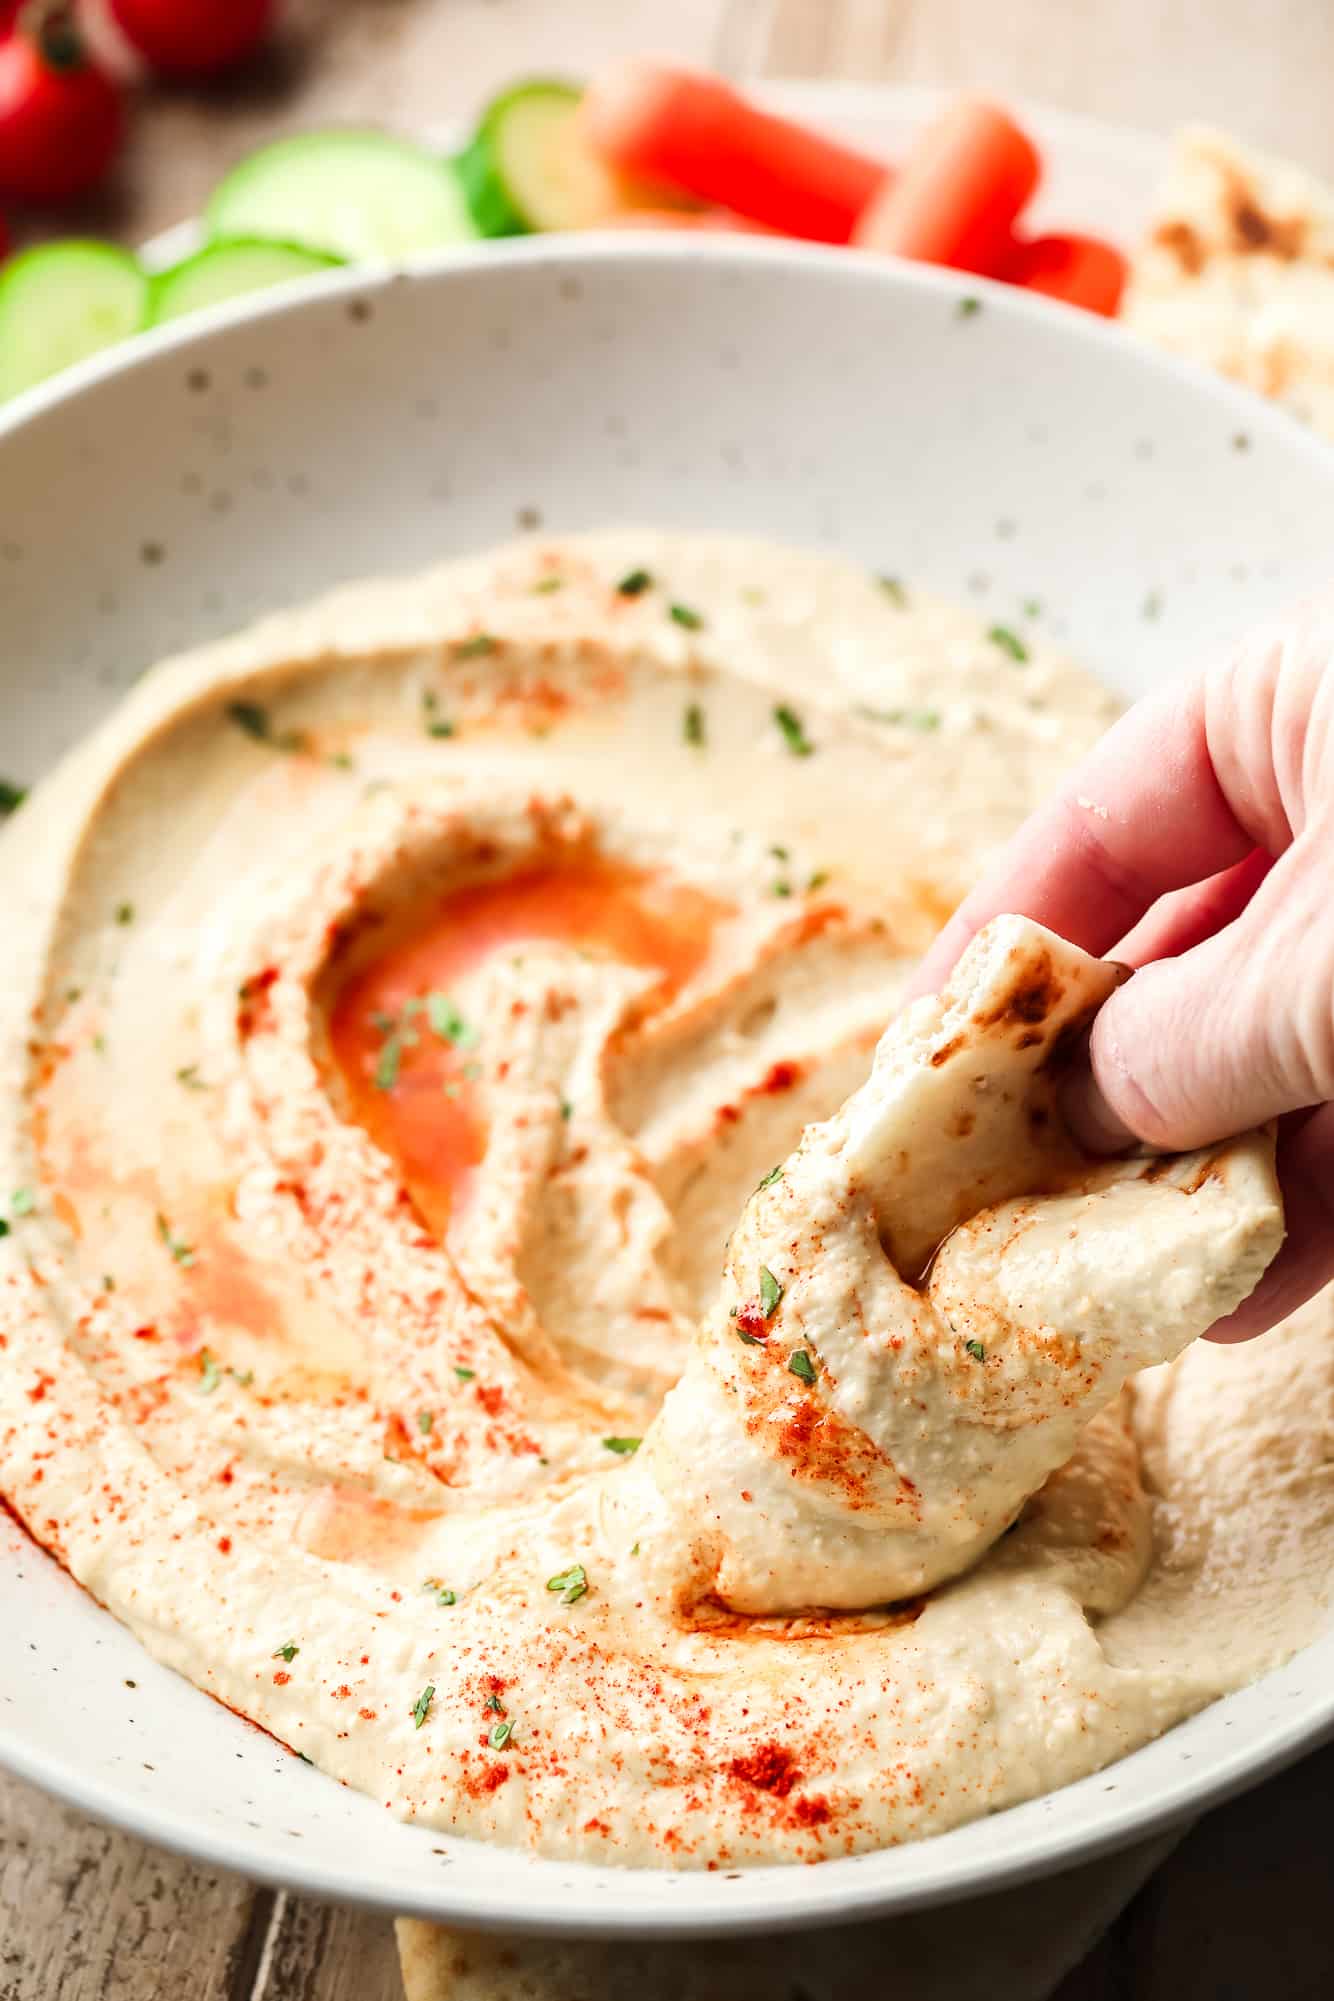 a hand dipping pita bread in a bowl of hummus.